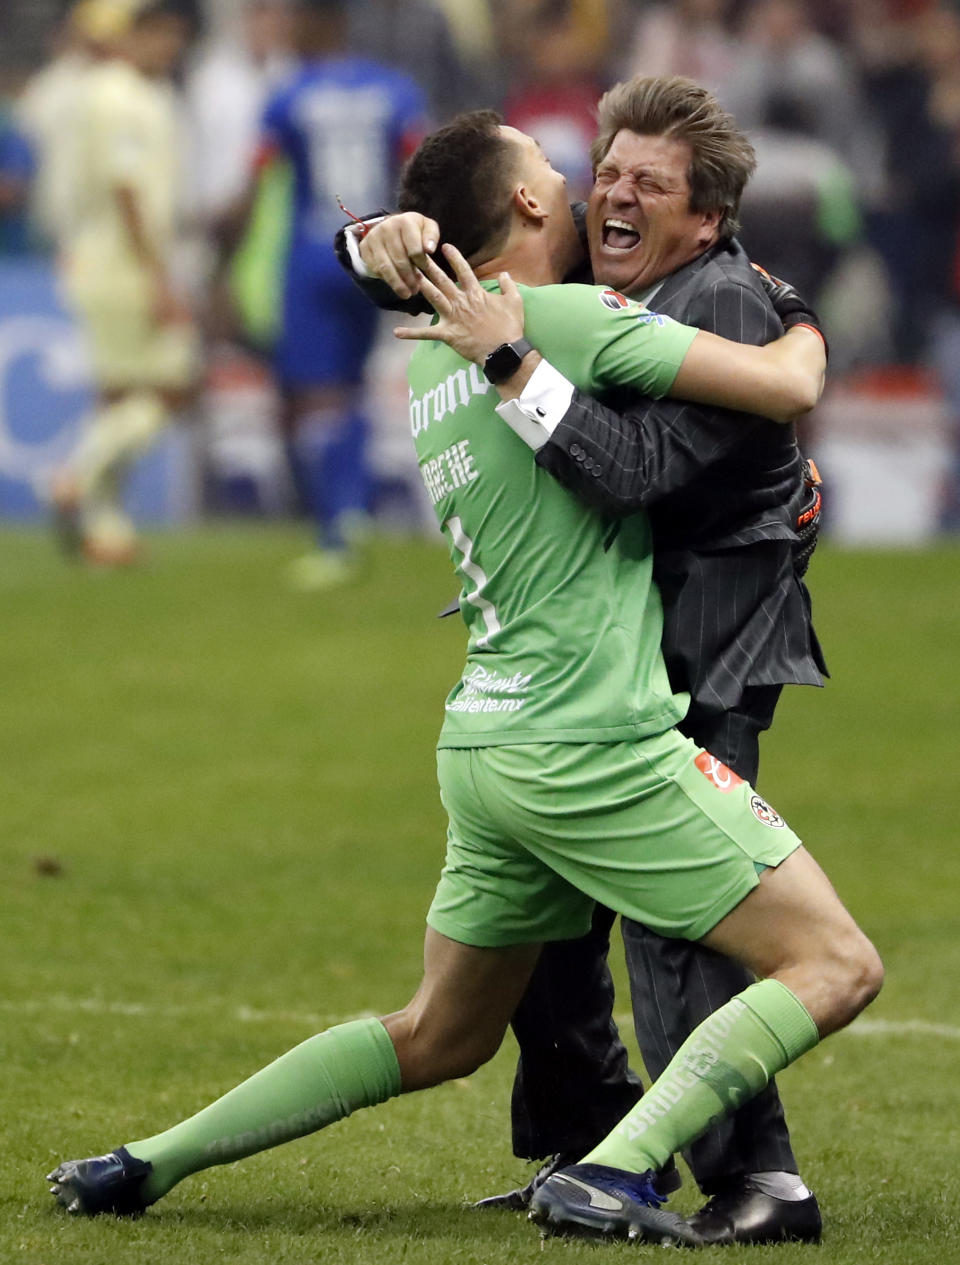 America coach Miguel Herrera and goalkeeper Agustin Marchesin embrace after defeating Cruz Azul in the final Mexico soccer league championship match at Azteca stadium in Mexico City, on Sunday, Dec. 16, 2018. America defeated Cruz Azul 2-0 on Sunday to become the champion of the Mexican Apertura tournament, which earned them their 13th league title, becoming the most successful team in the country. (AP Photo/Eduardo Verdugo)